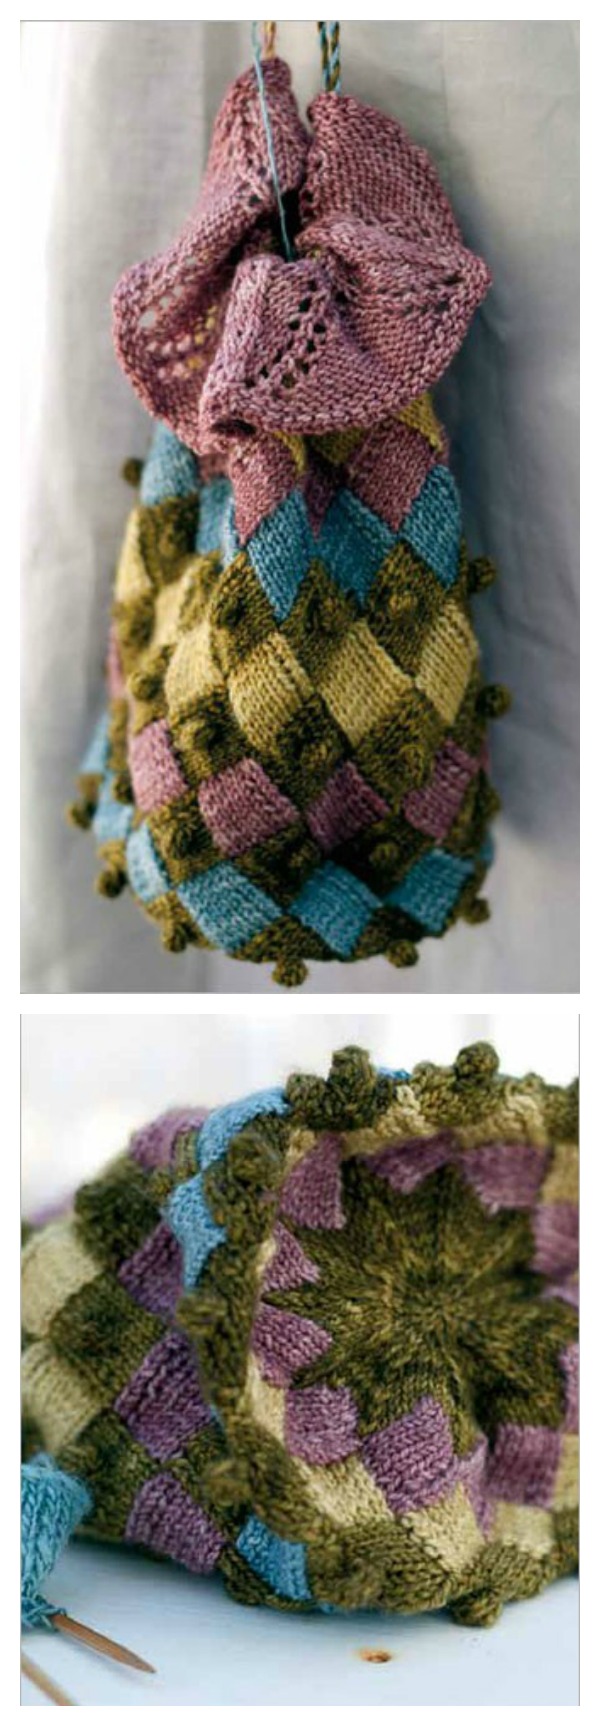 Entrelac Bag with Bobble Trim Knitting Pattern - Cool ...